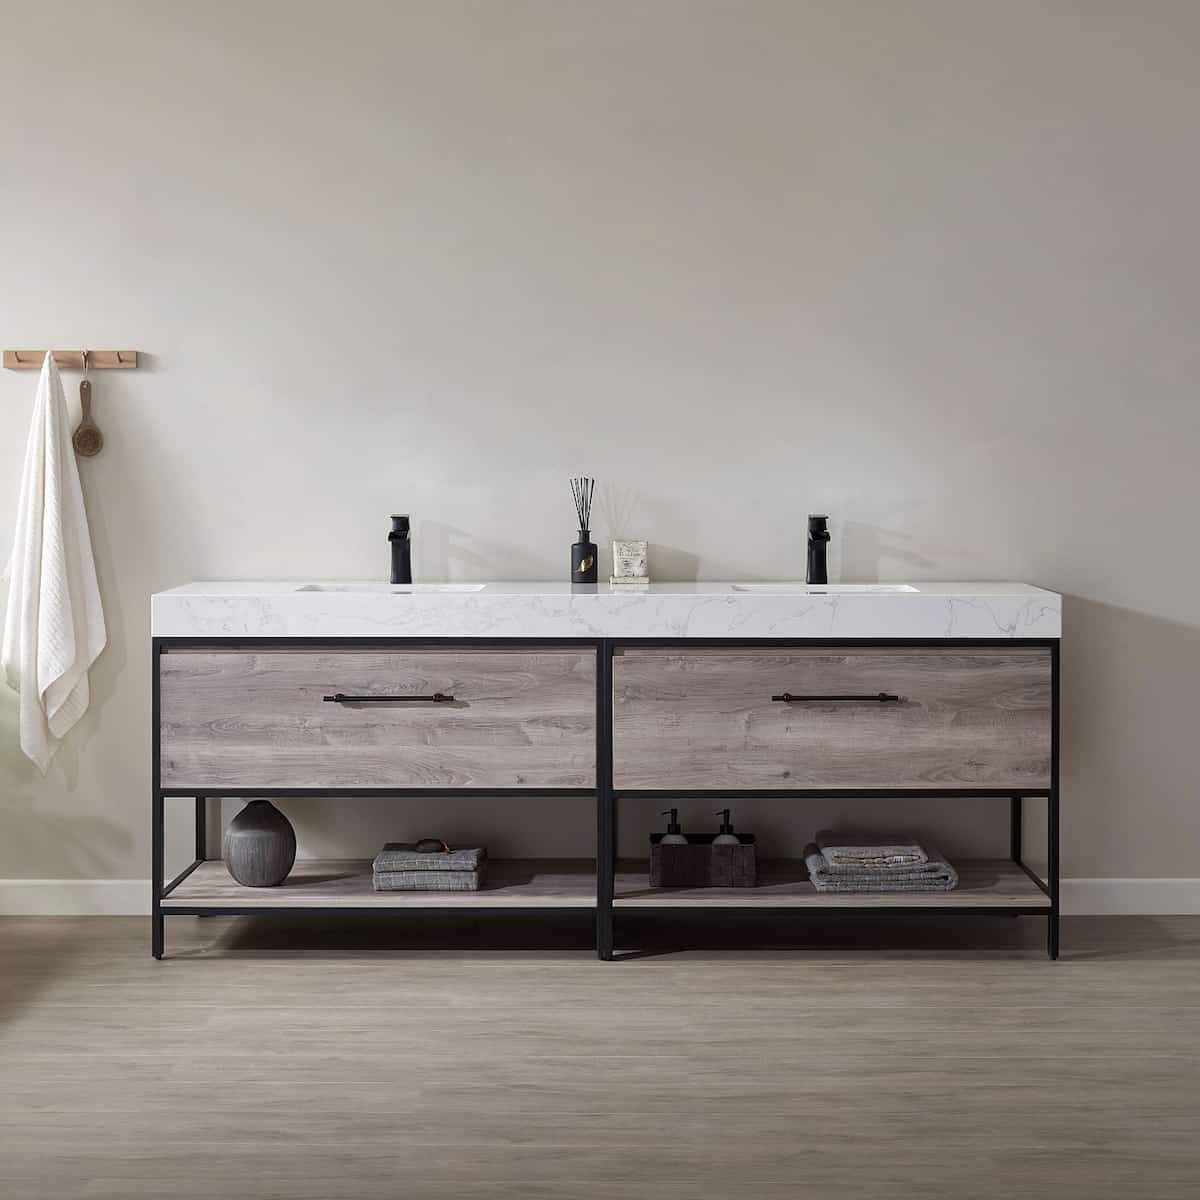 Vinnova Palma 84 Inch Freestanding Double Vanity in Mexican Oak with White Composite Grain Stone Countertop Without Mirrors in Bathroom 701284-MXO-GW-NM